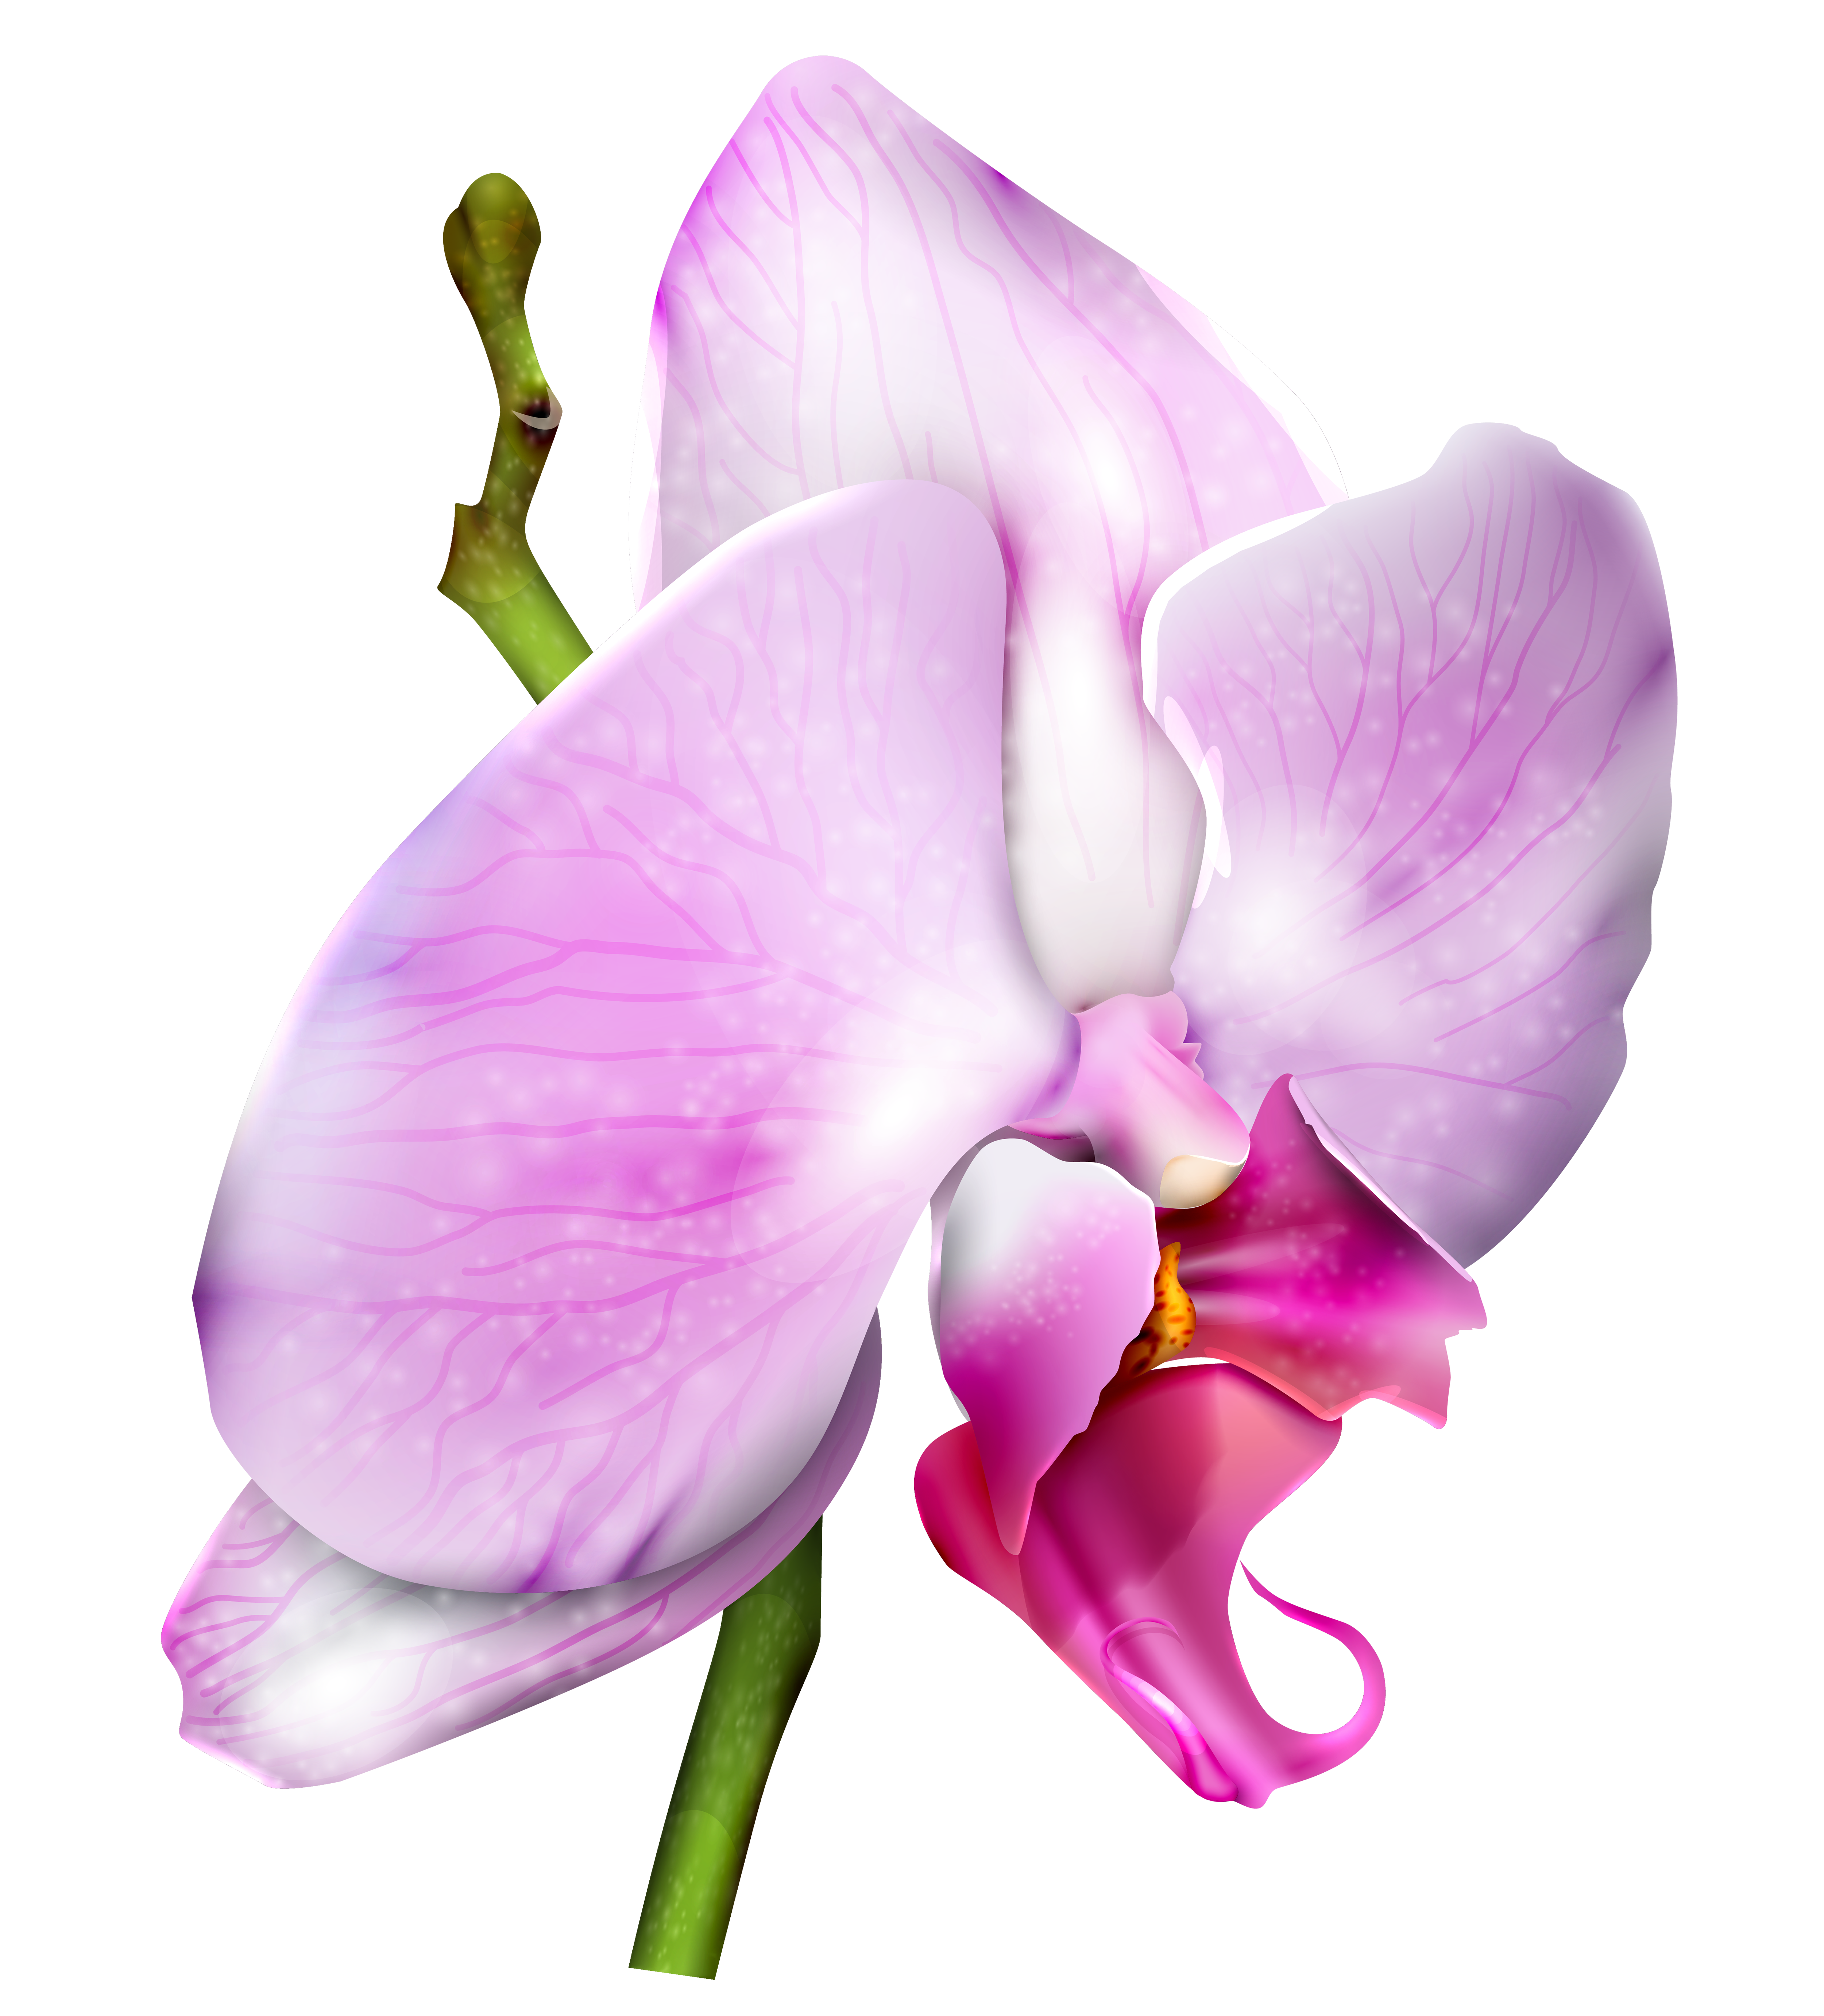 orchid clipart violet orchid